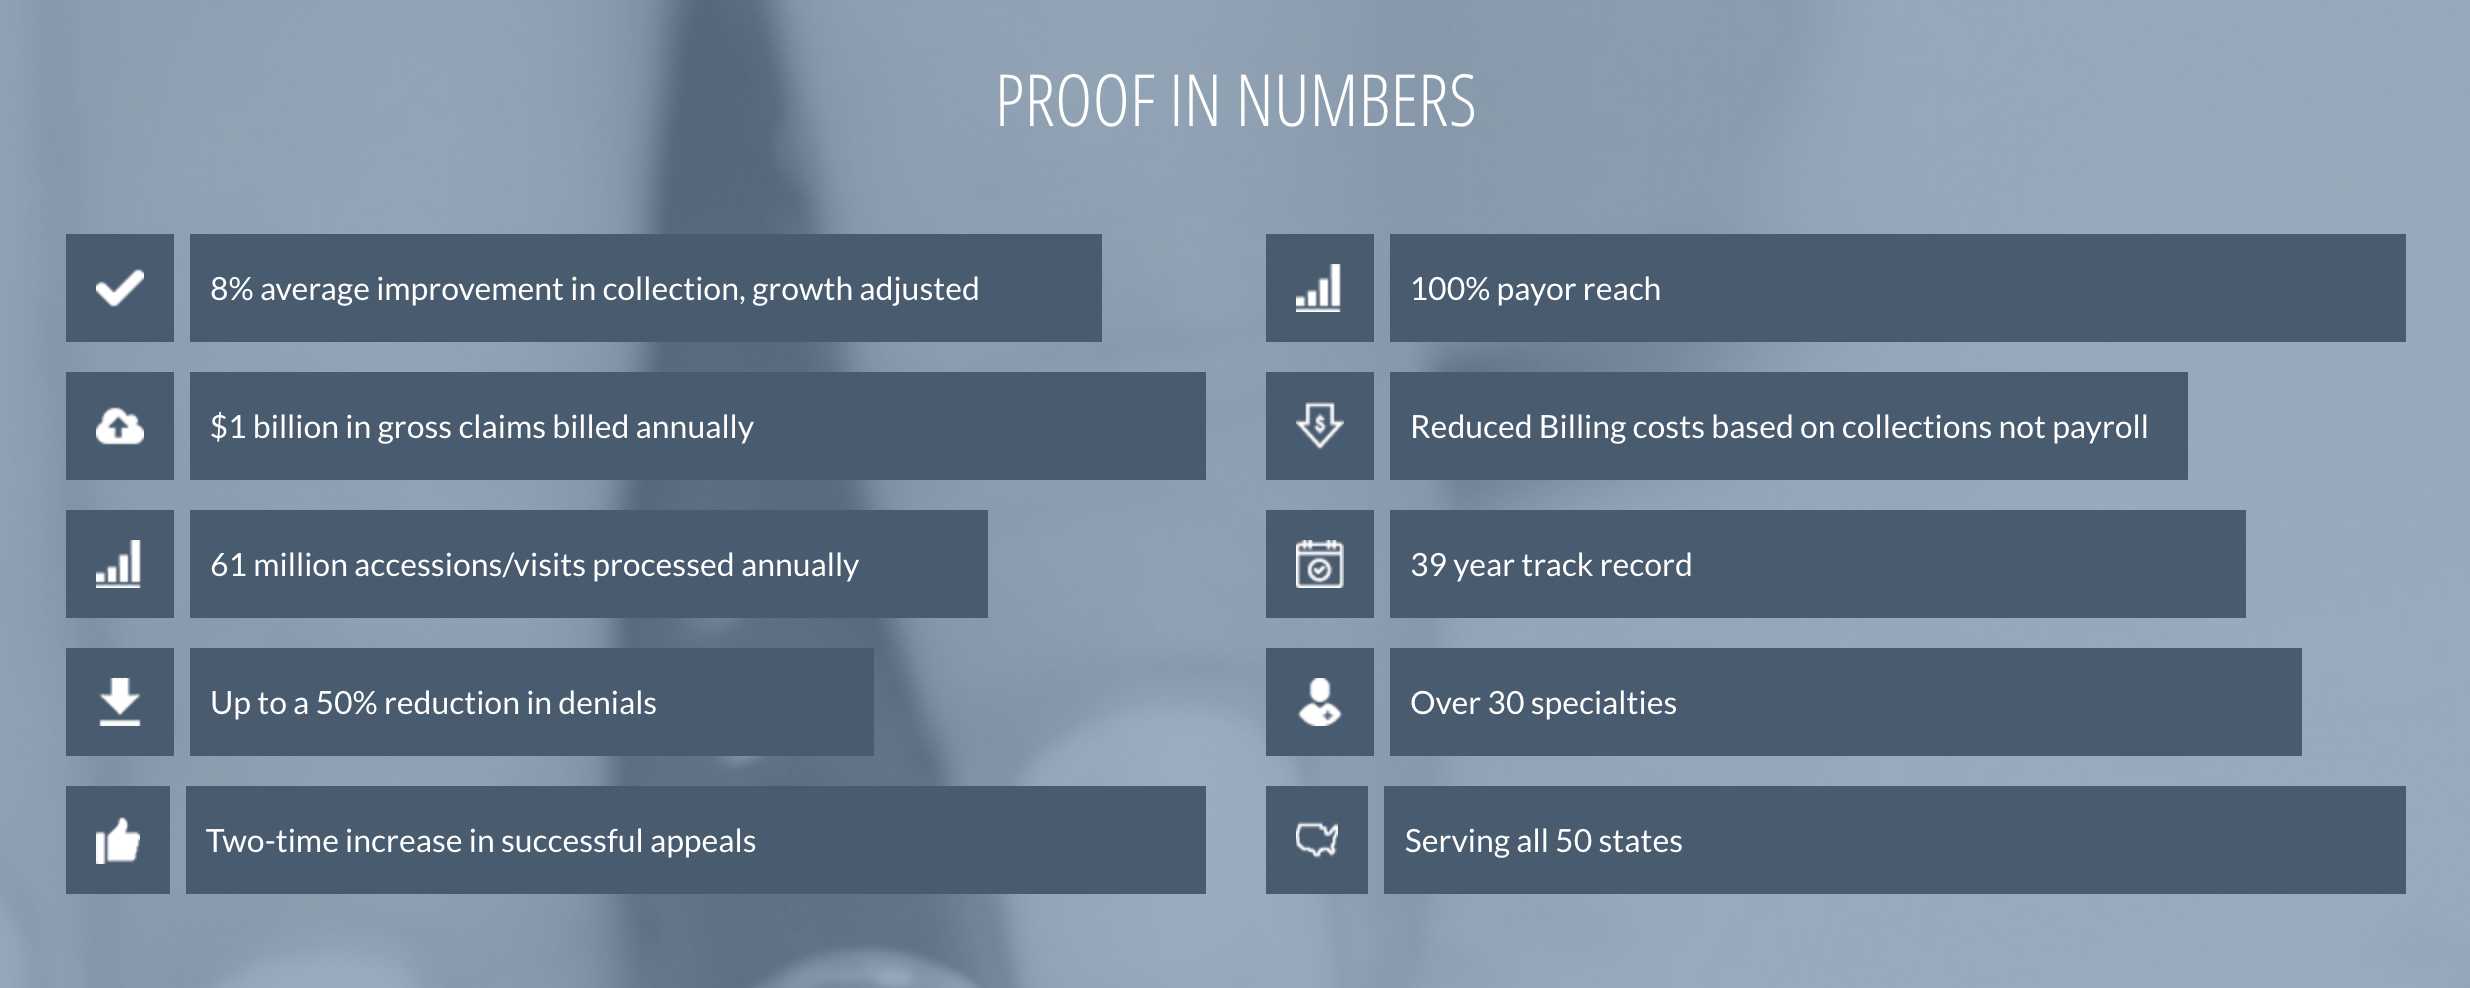 Proof in Numbers:  PGM will help you increase your revenue and grow your bottom line. Our proof is in the numbers.